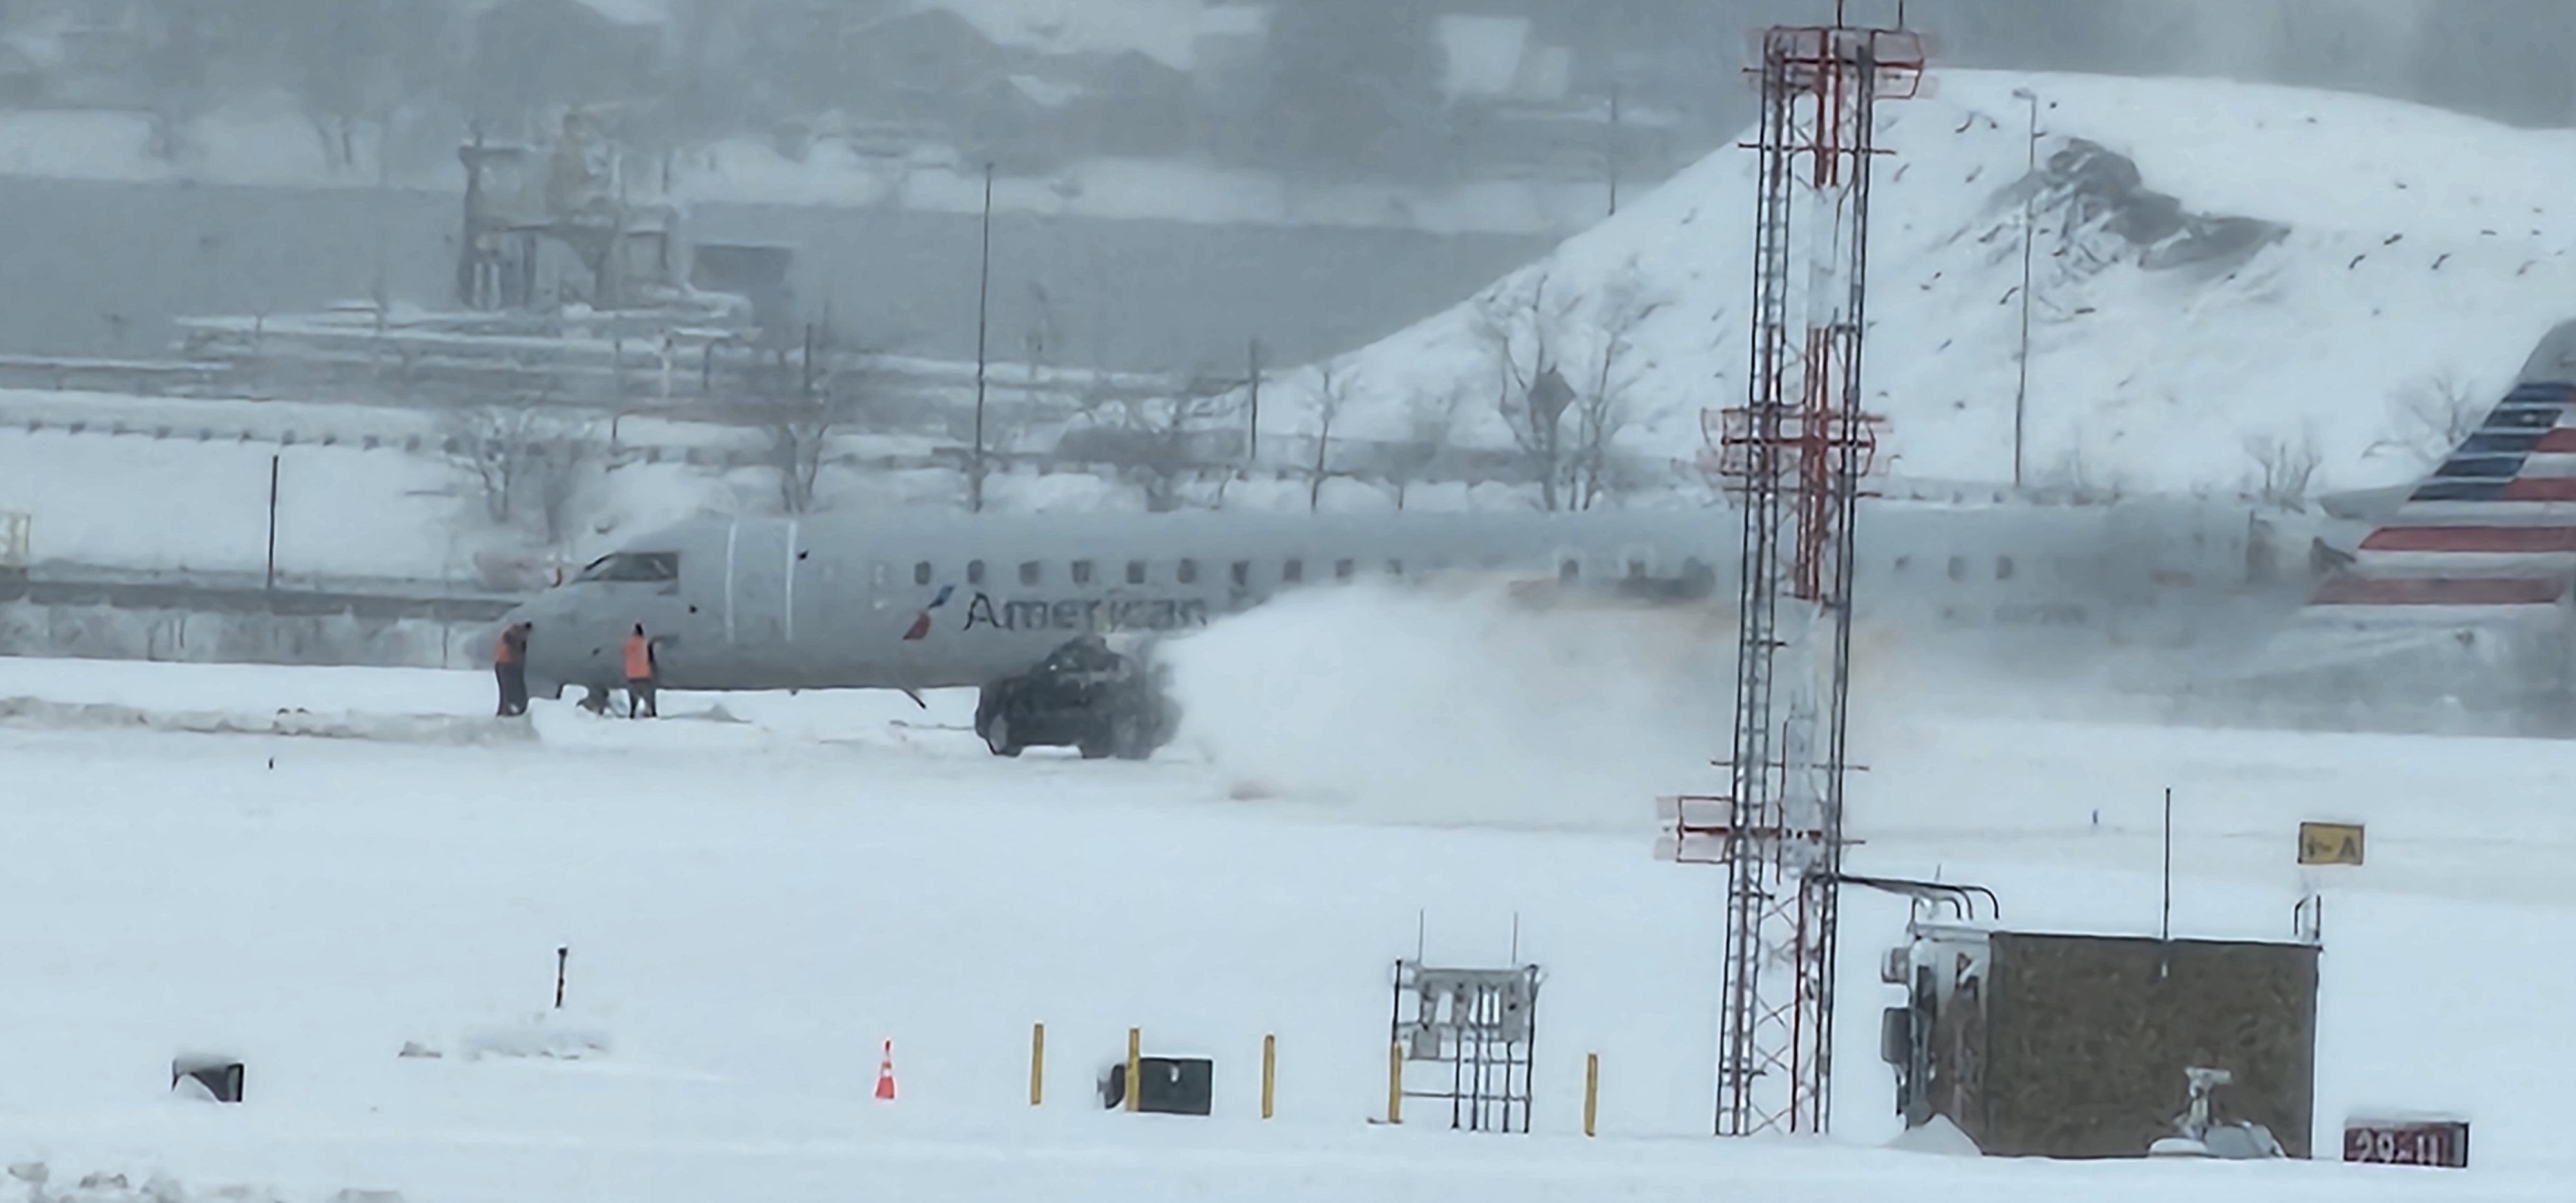 American Airlines Bombardier CRJ900 Slides Off Runway In the snow